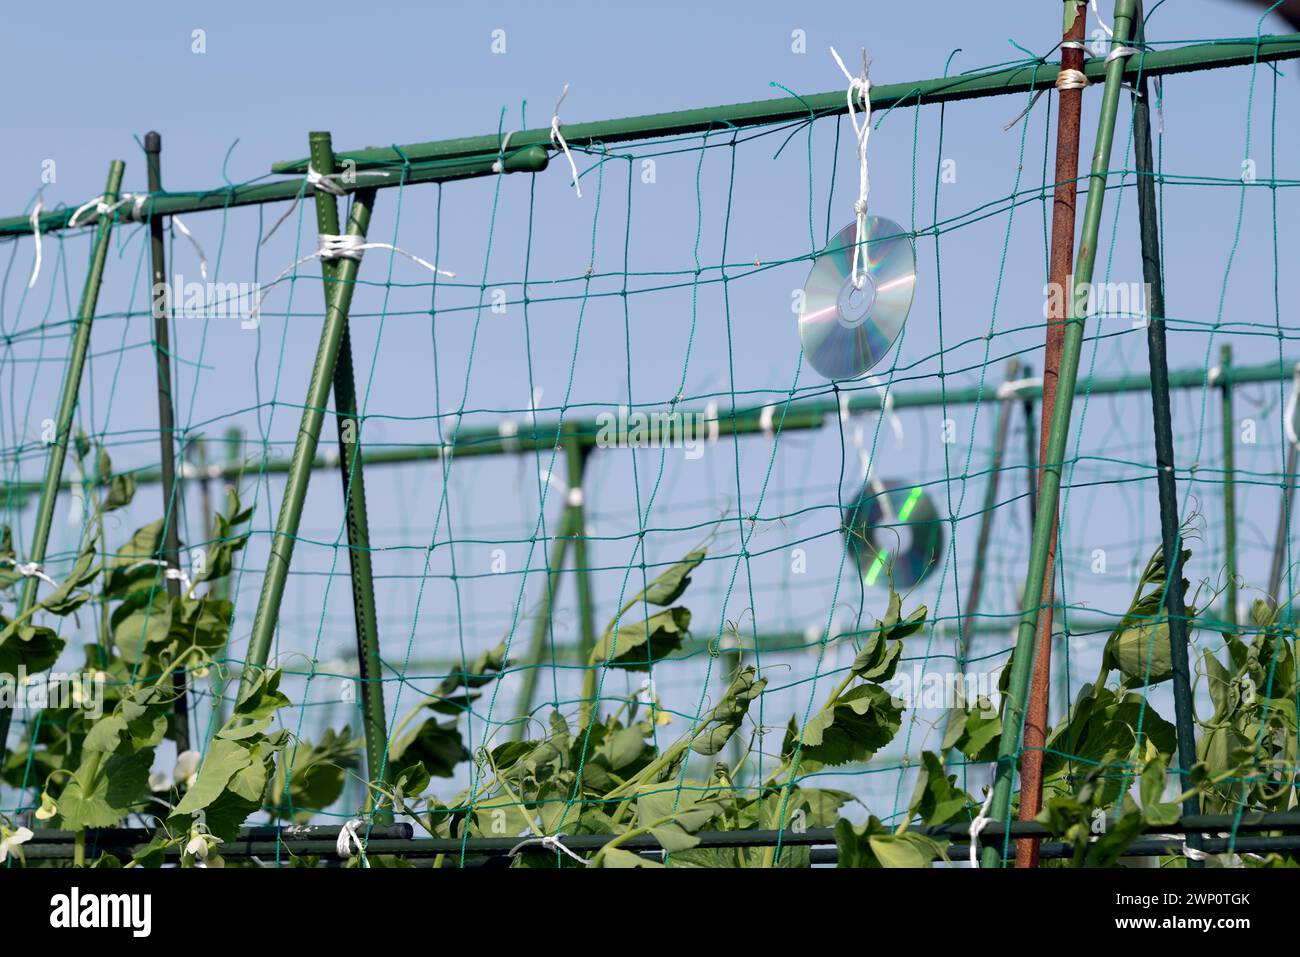 CD and DVD discs are used to scare birds in a vegetable garden. Stock Photo